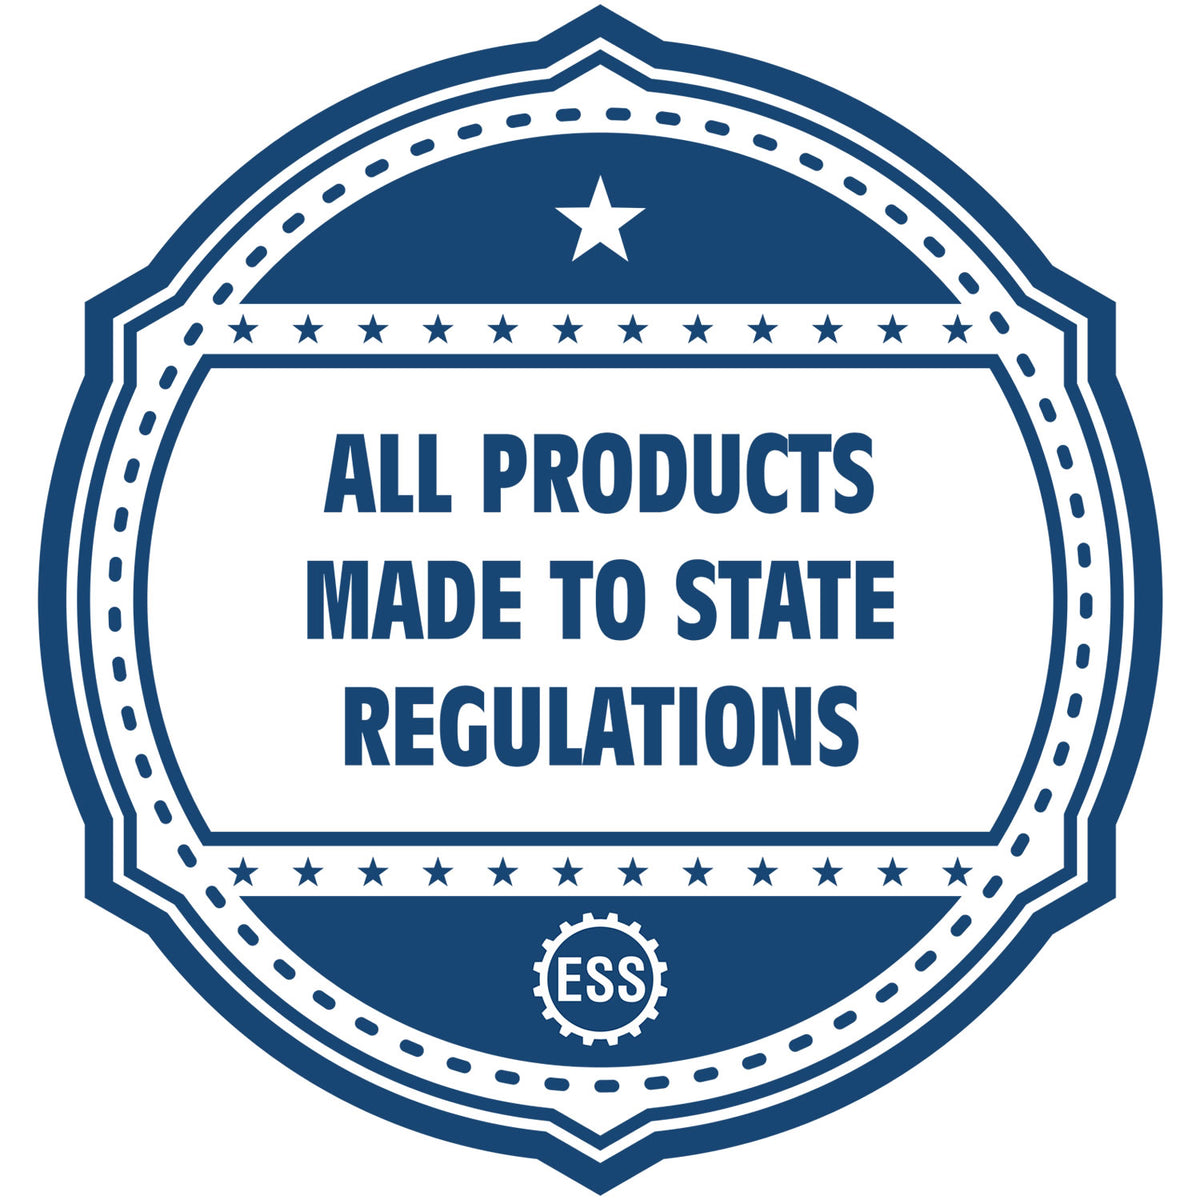 An icon or badge element for the Long Reach Vermont PE Seal showing that this product is made in compliance with state regulations.